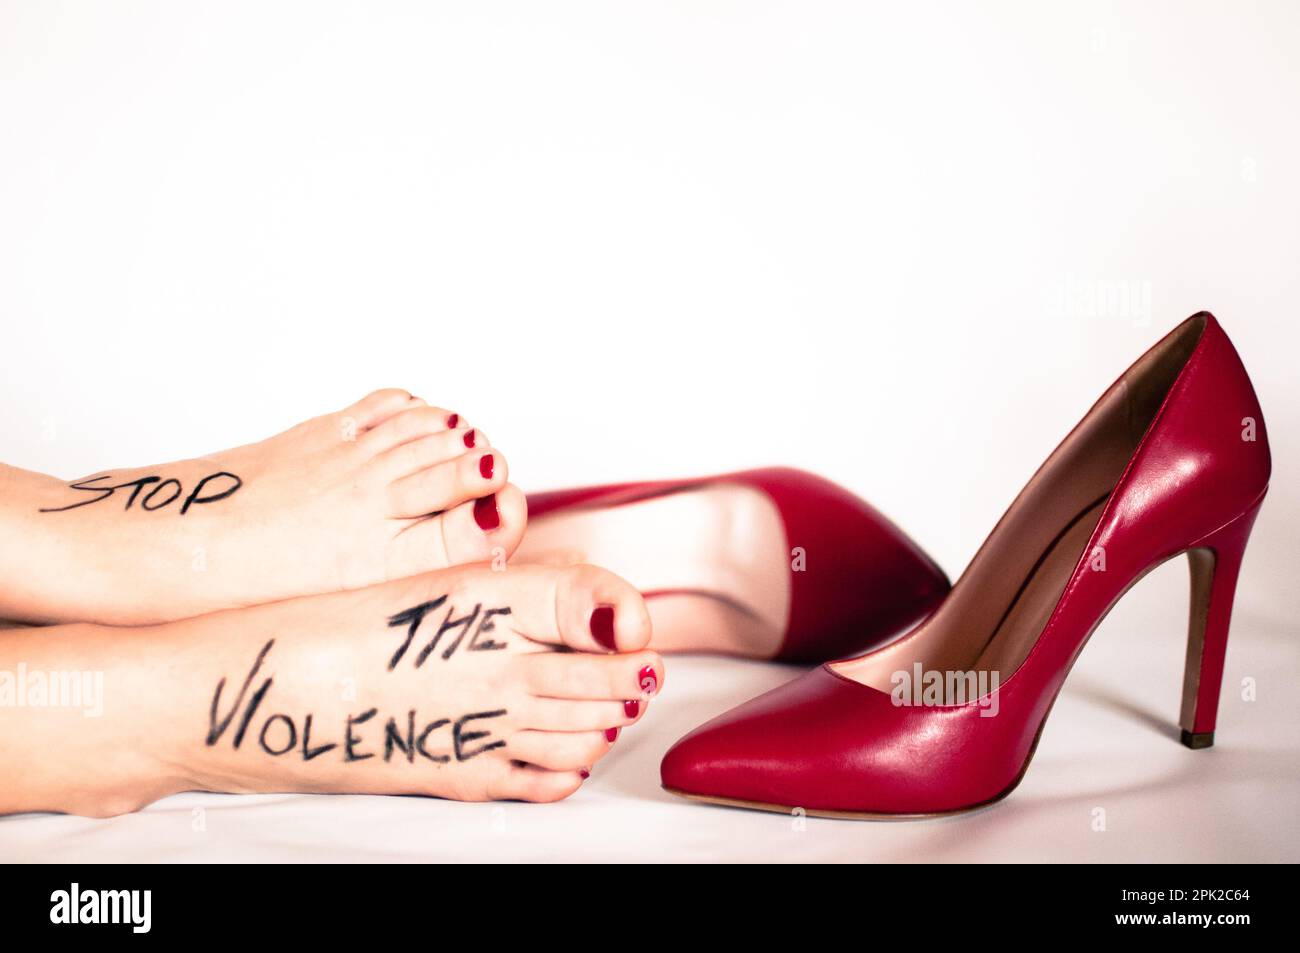 International day for the elimination of violence against women. Credits: Andrea Pinna Stock Photo